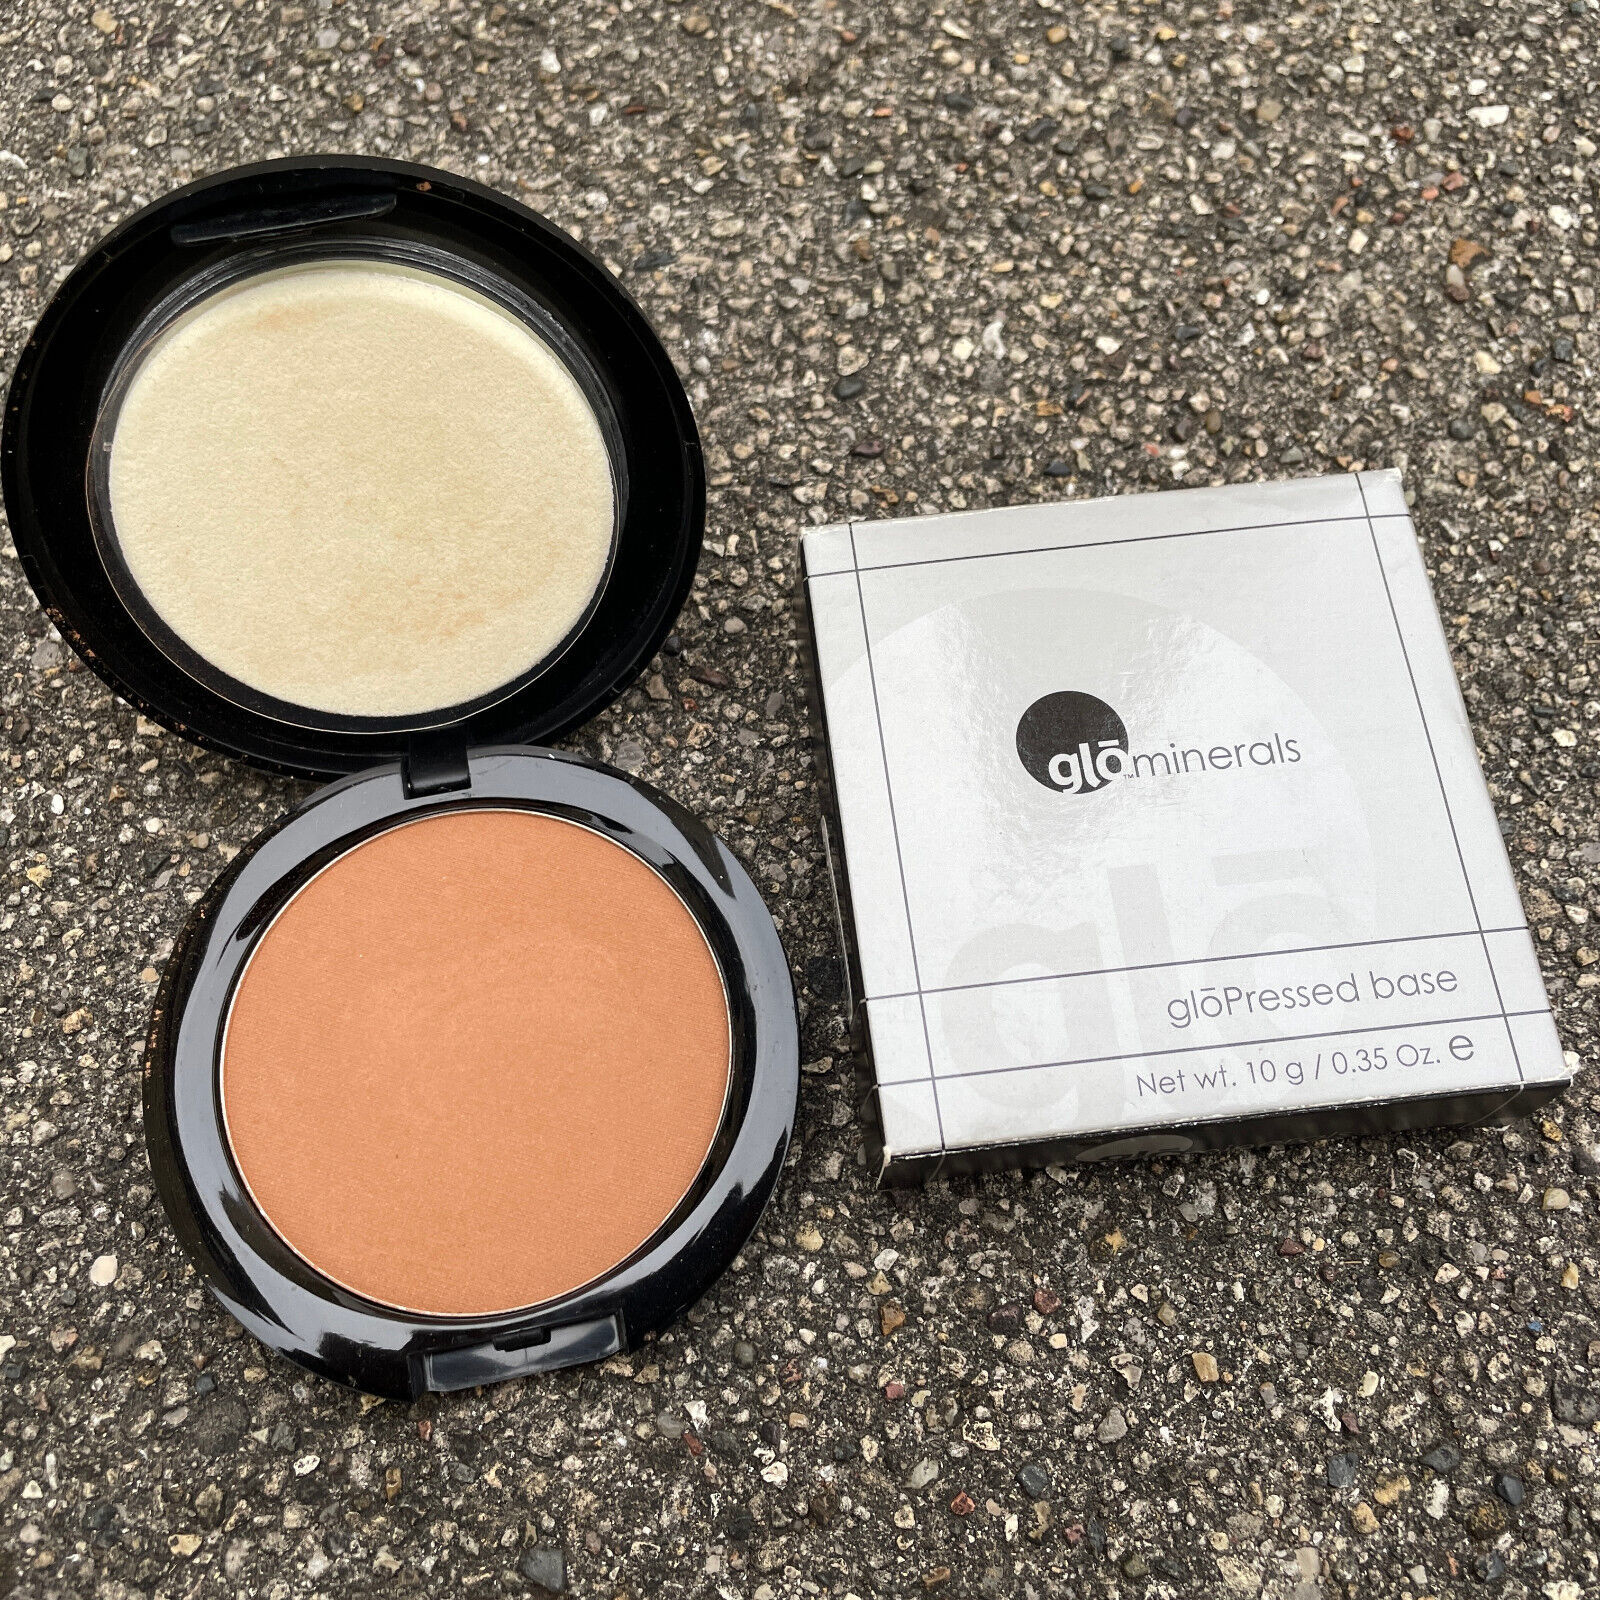 Glominerals GloPressed Base Cocoa-Light 10g/.35 Oz. Makeup Made In USA - $24.22